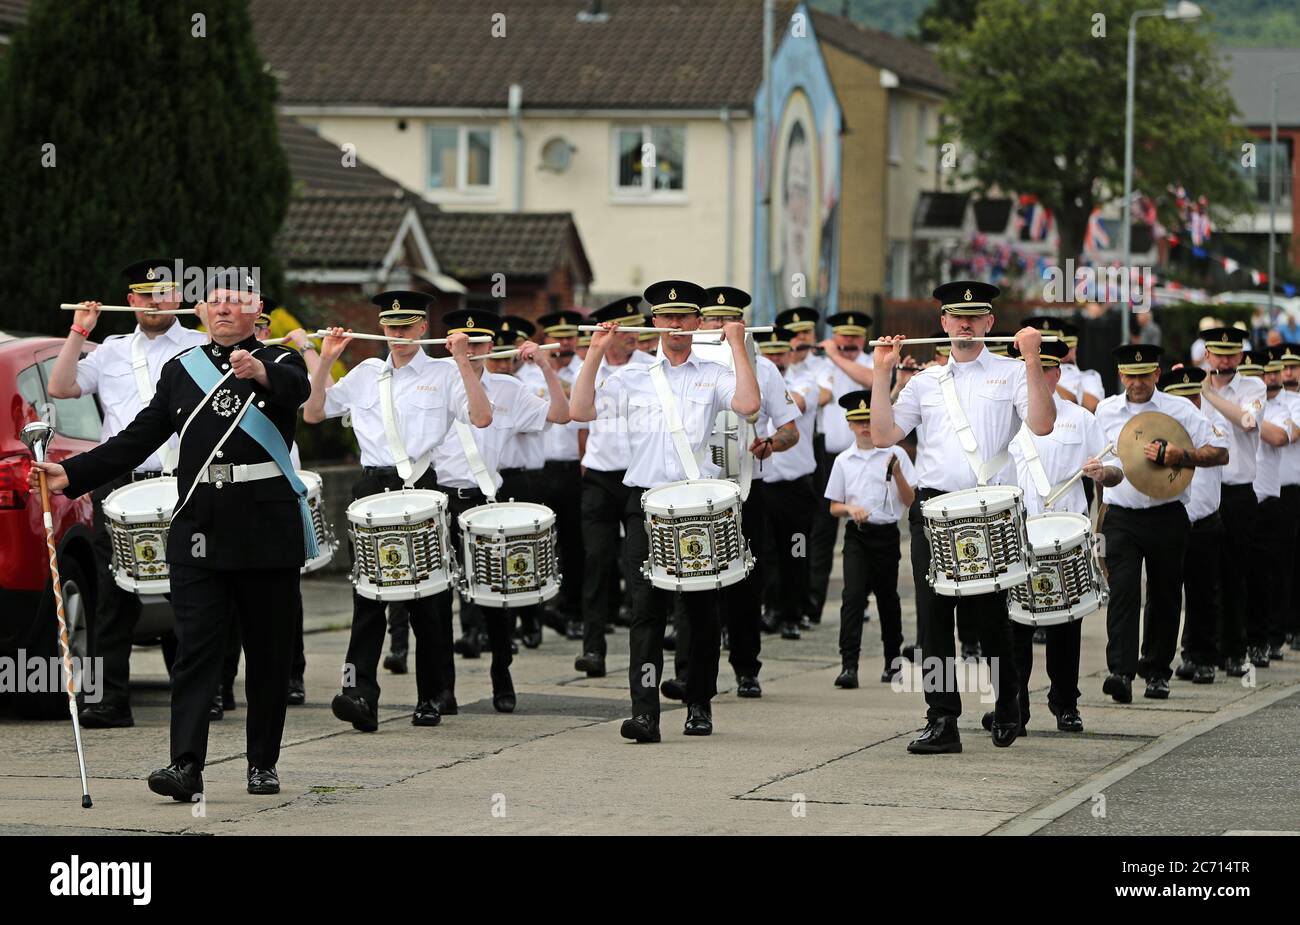 Members of the Shankill Road Defenders flute band march though the lower Shankill estate, Belfast, for social distanced Twelfth of July celebrations despite advice to remain at home due to the coronavirus outbreak. The Twelfth is being celebrated on 13 July as 12 July this year falls on a Sunday. Stock Photo